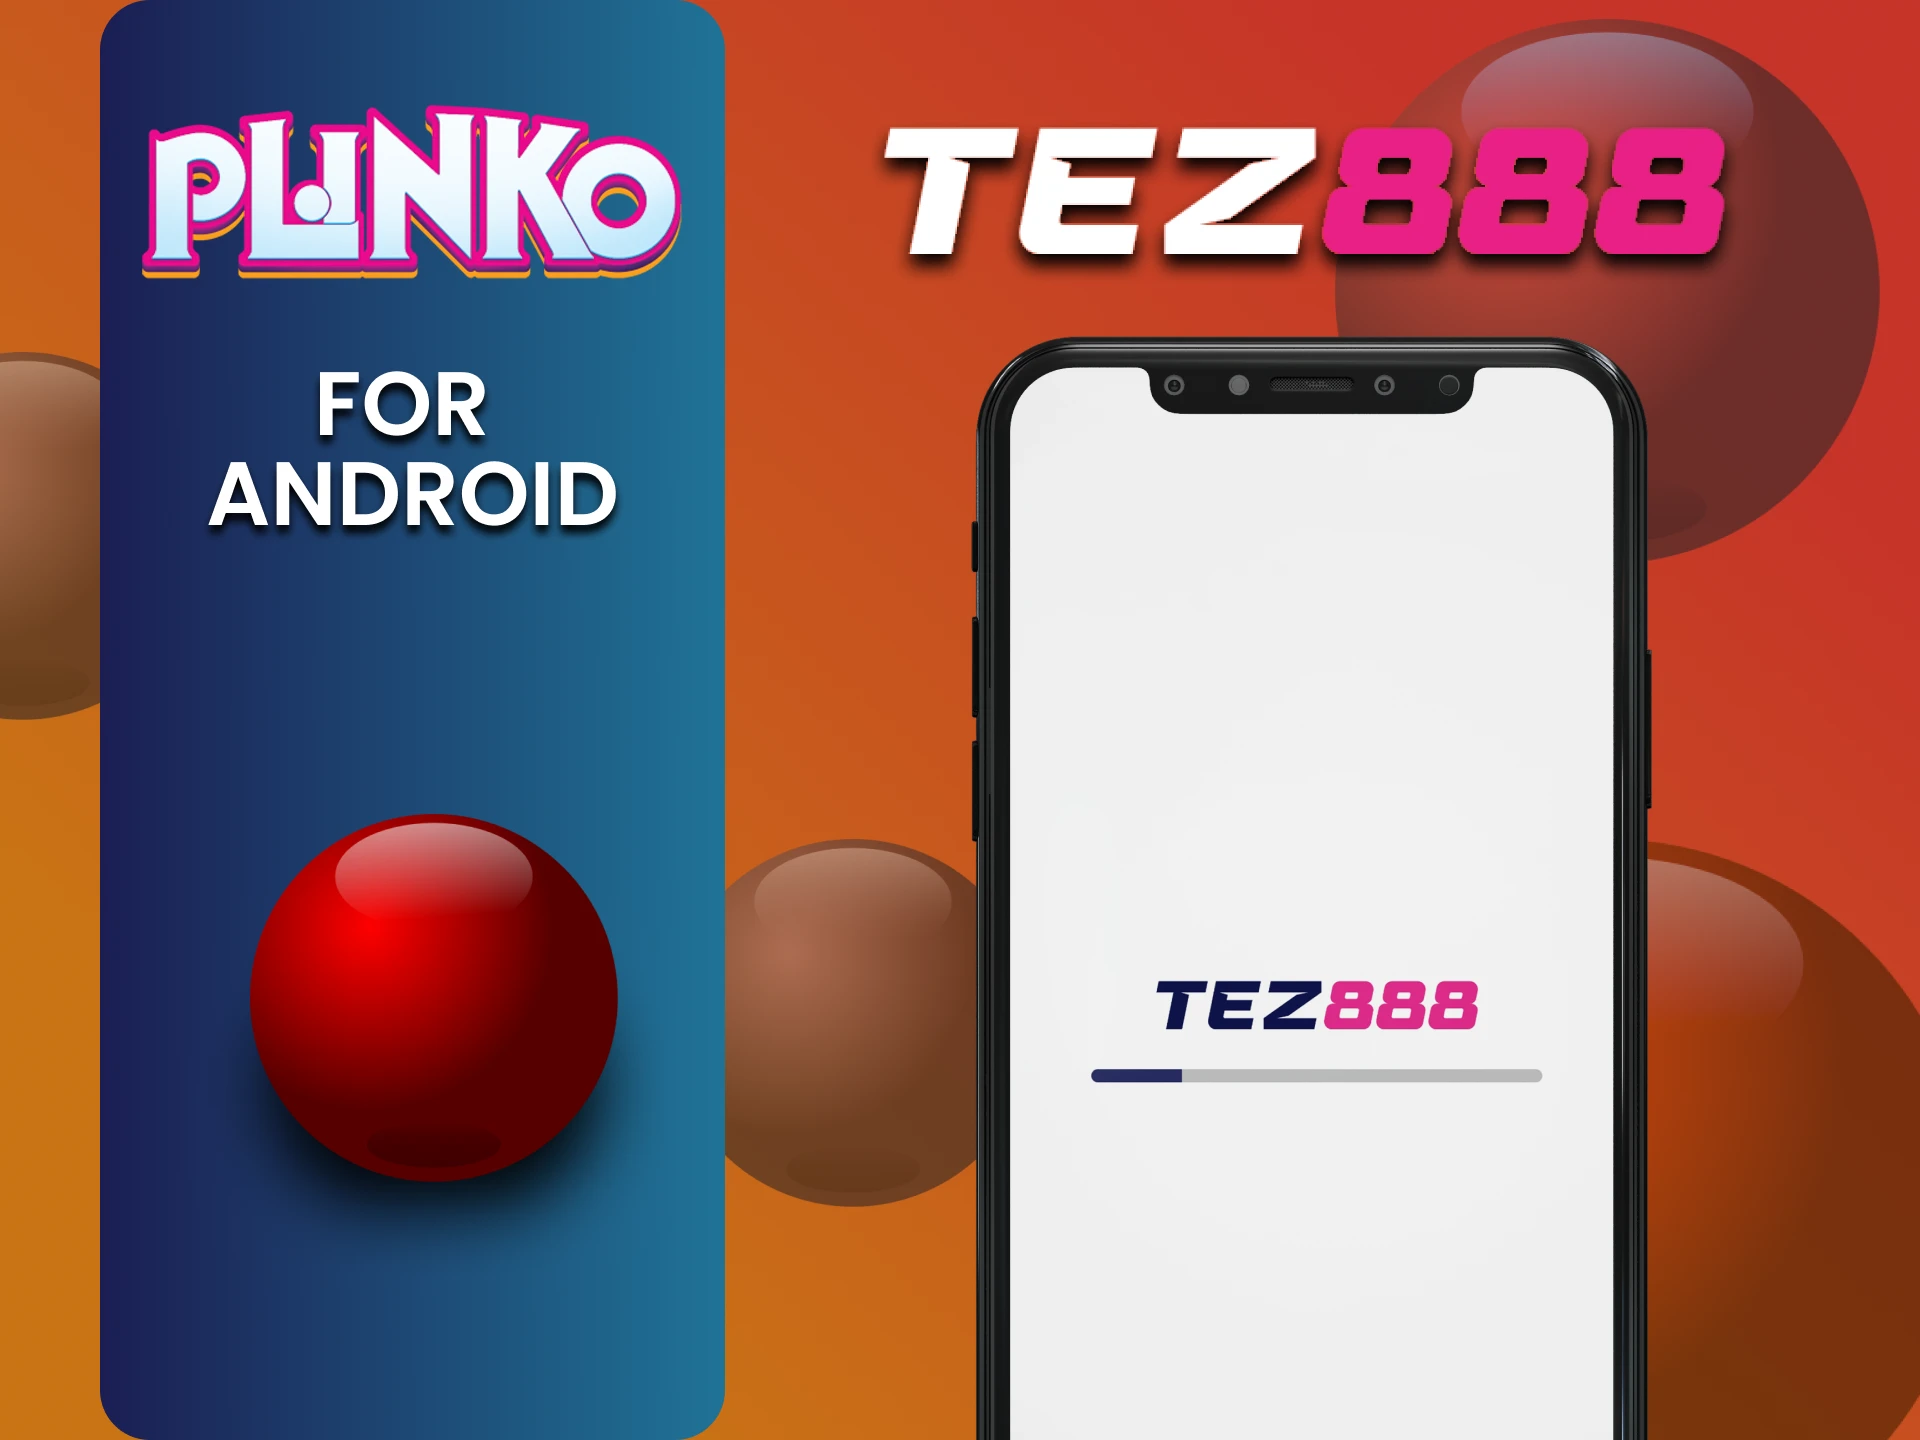 Download the Tez888 app to play Plinko on Android.